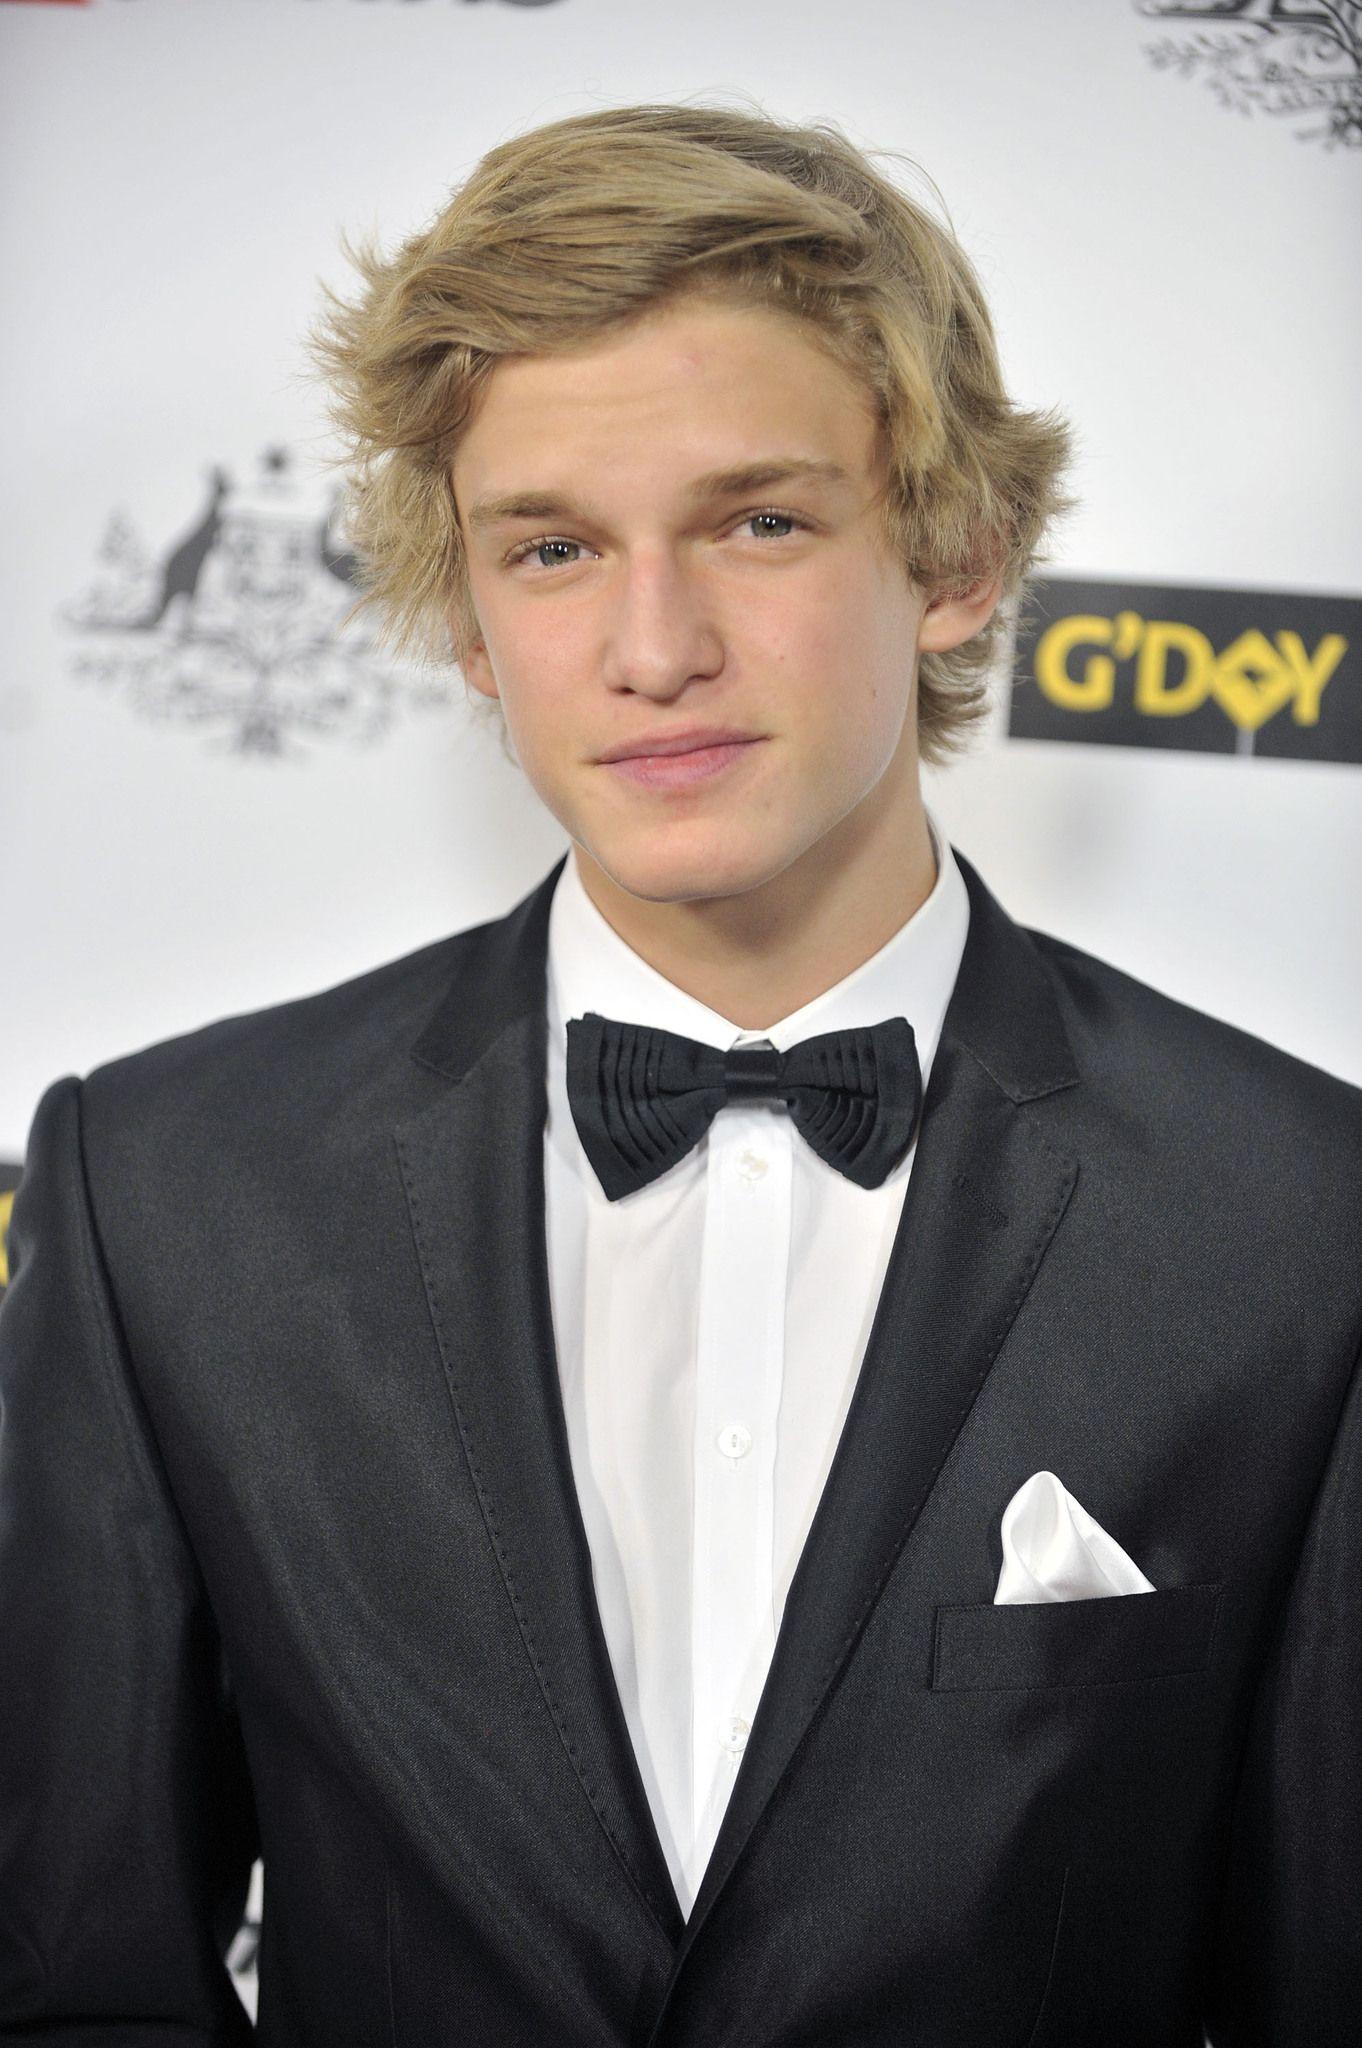 Cody Simpson Wallpaper Image Photo Picture Background. Best